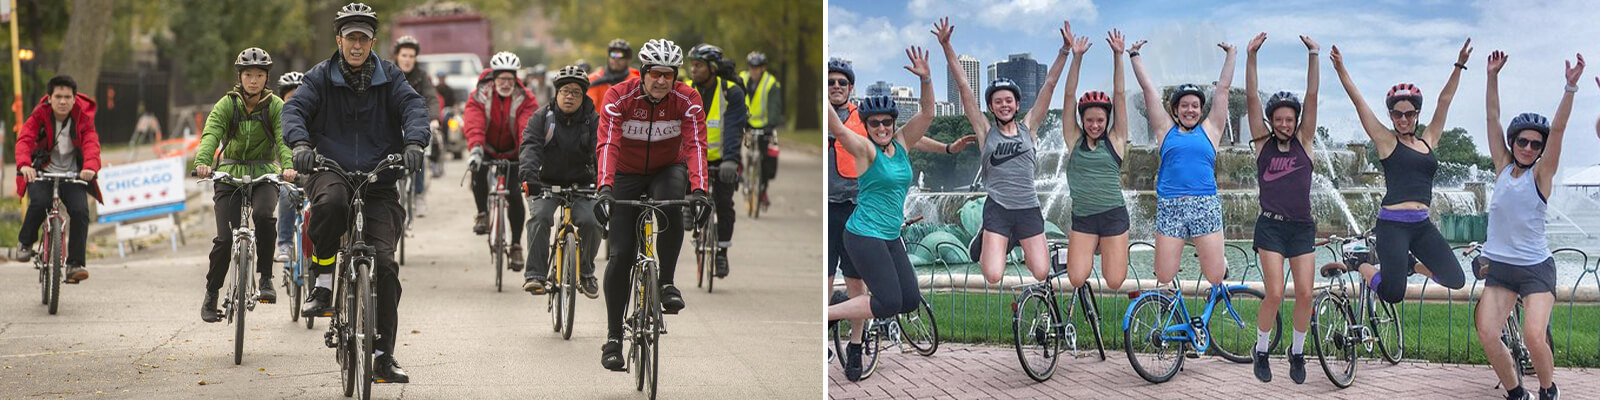 Chicago Ultimate City Bike Tour Coupons